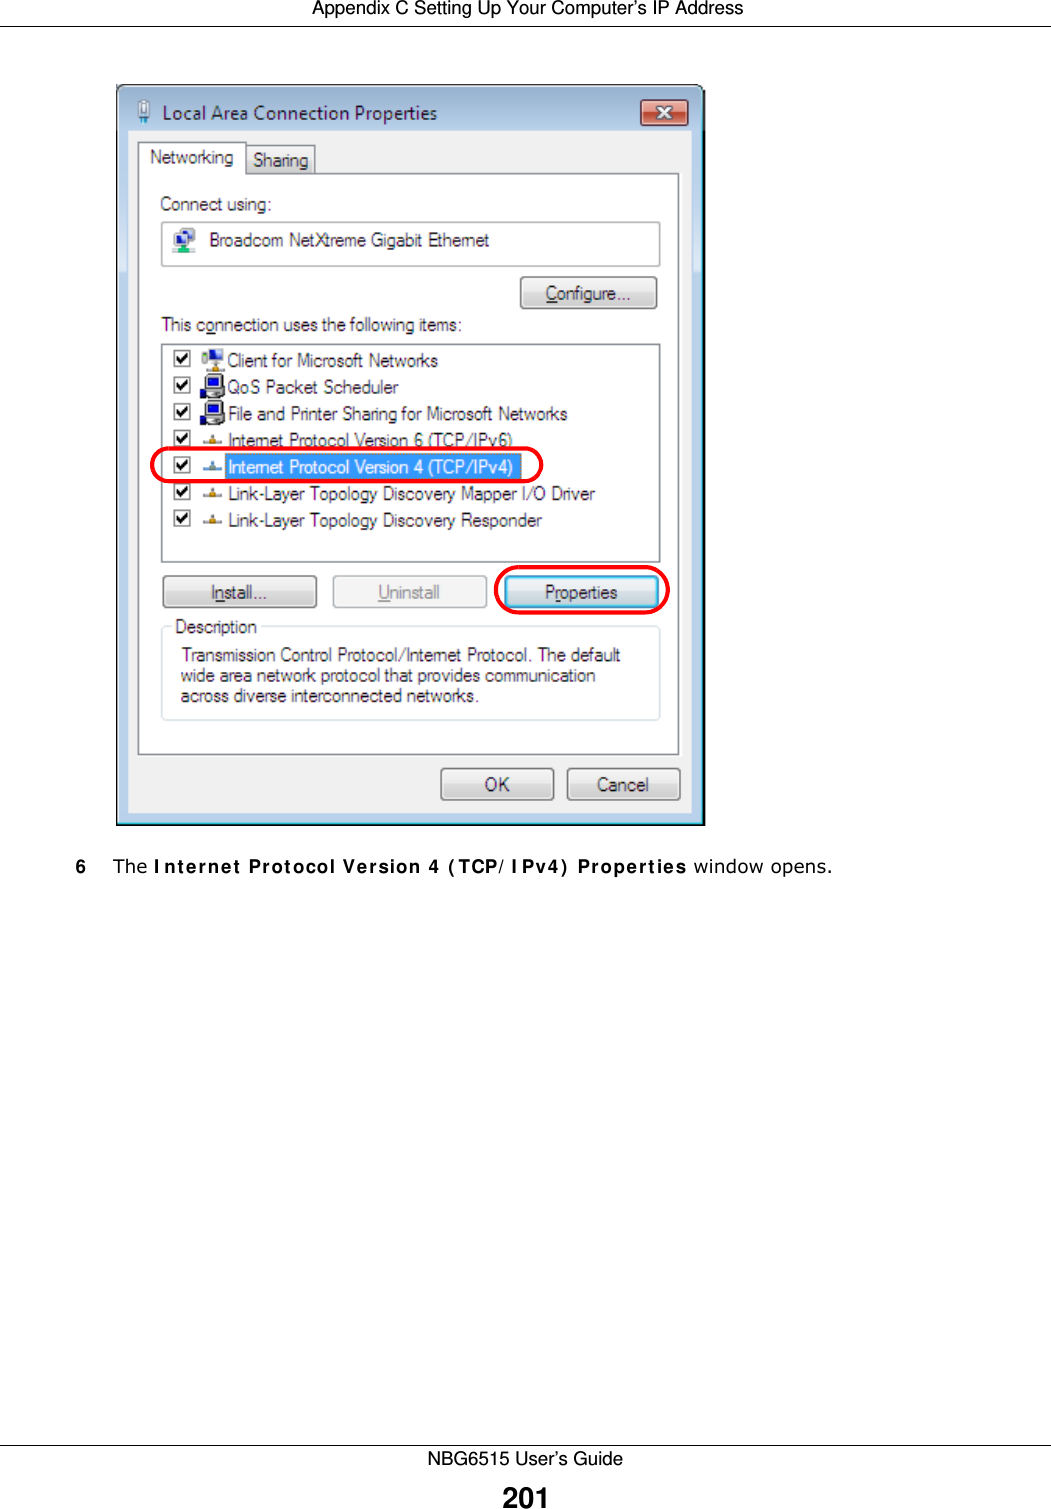  Appendix C Setting Up Your Computer’s IP AddressNBG6515 User’s Guide2016The I nt e rne t  Pr ot ocol Ver sion 4  ( TCP/ I Pv4 )  Prope rt ies window opens.